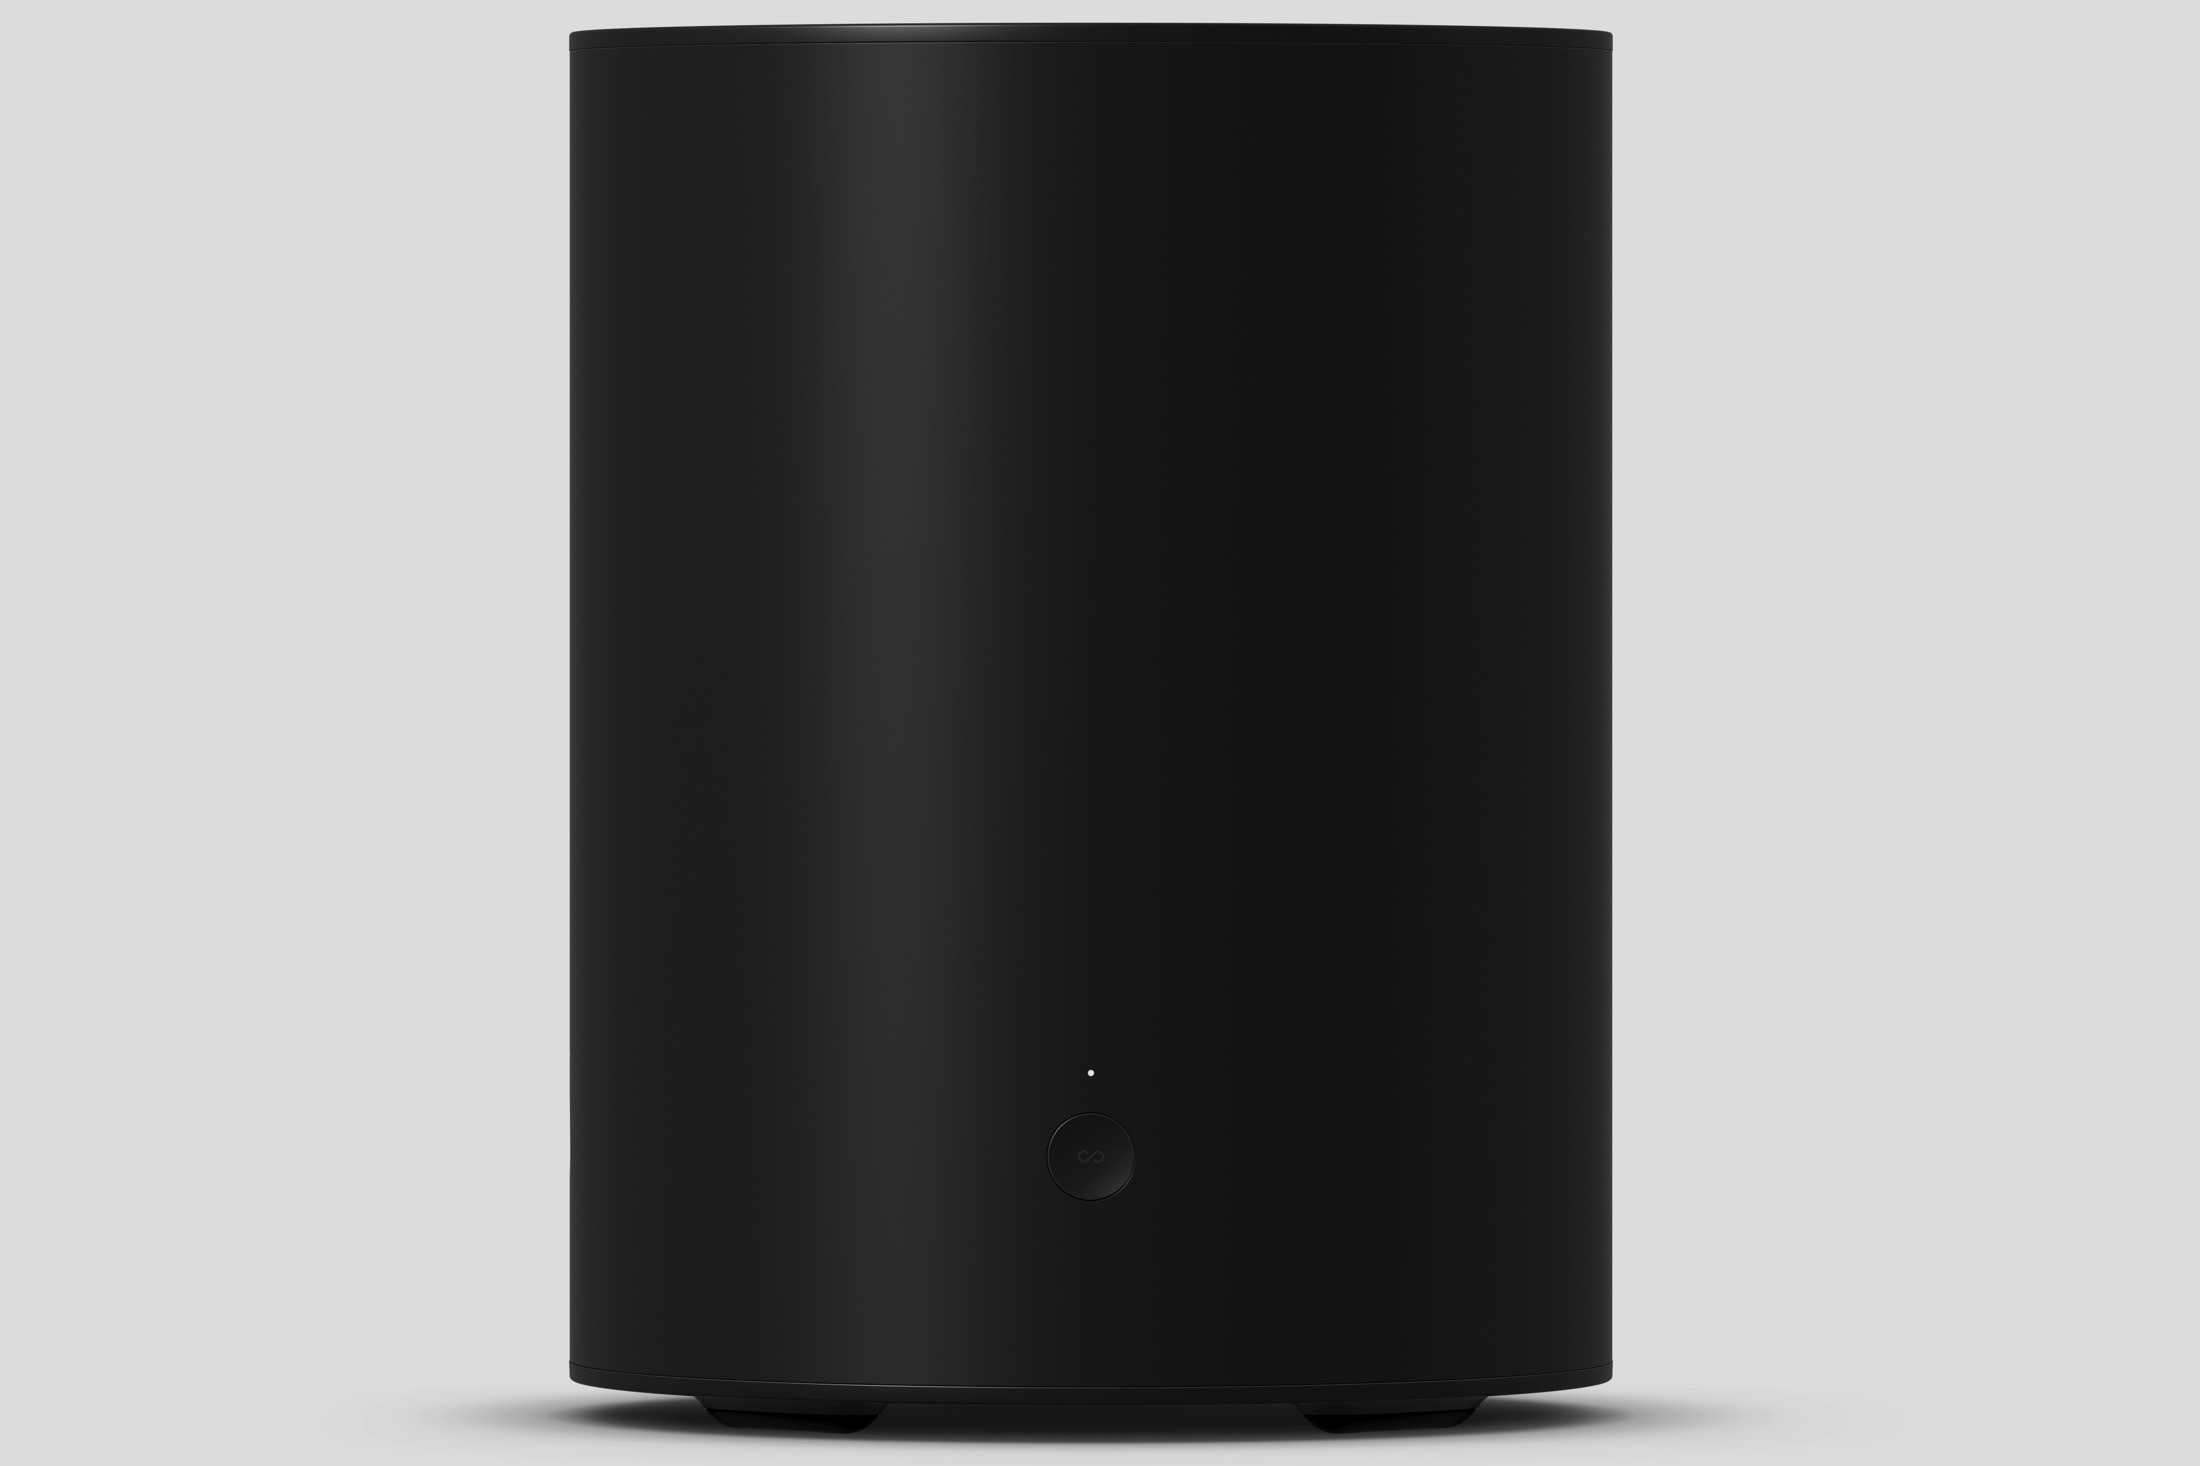 Sonos Sub Mini in black seen from the back.